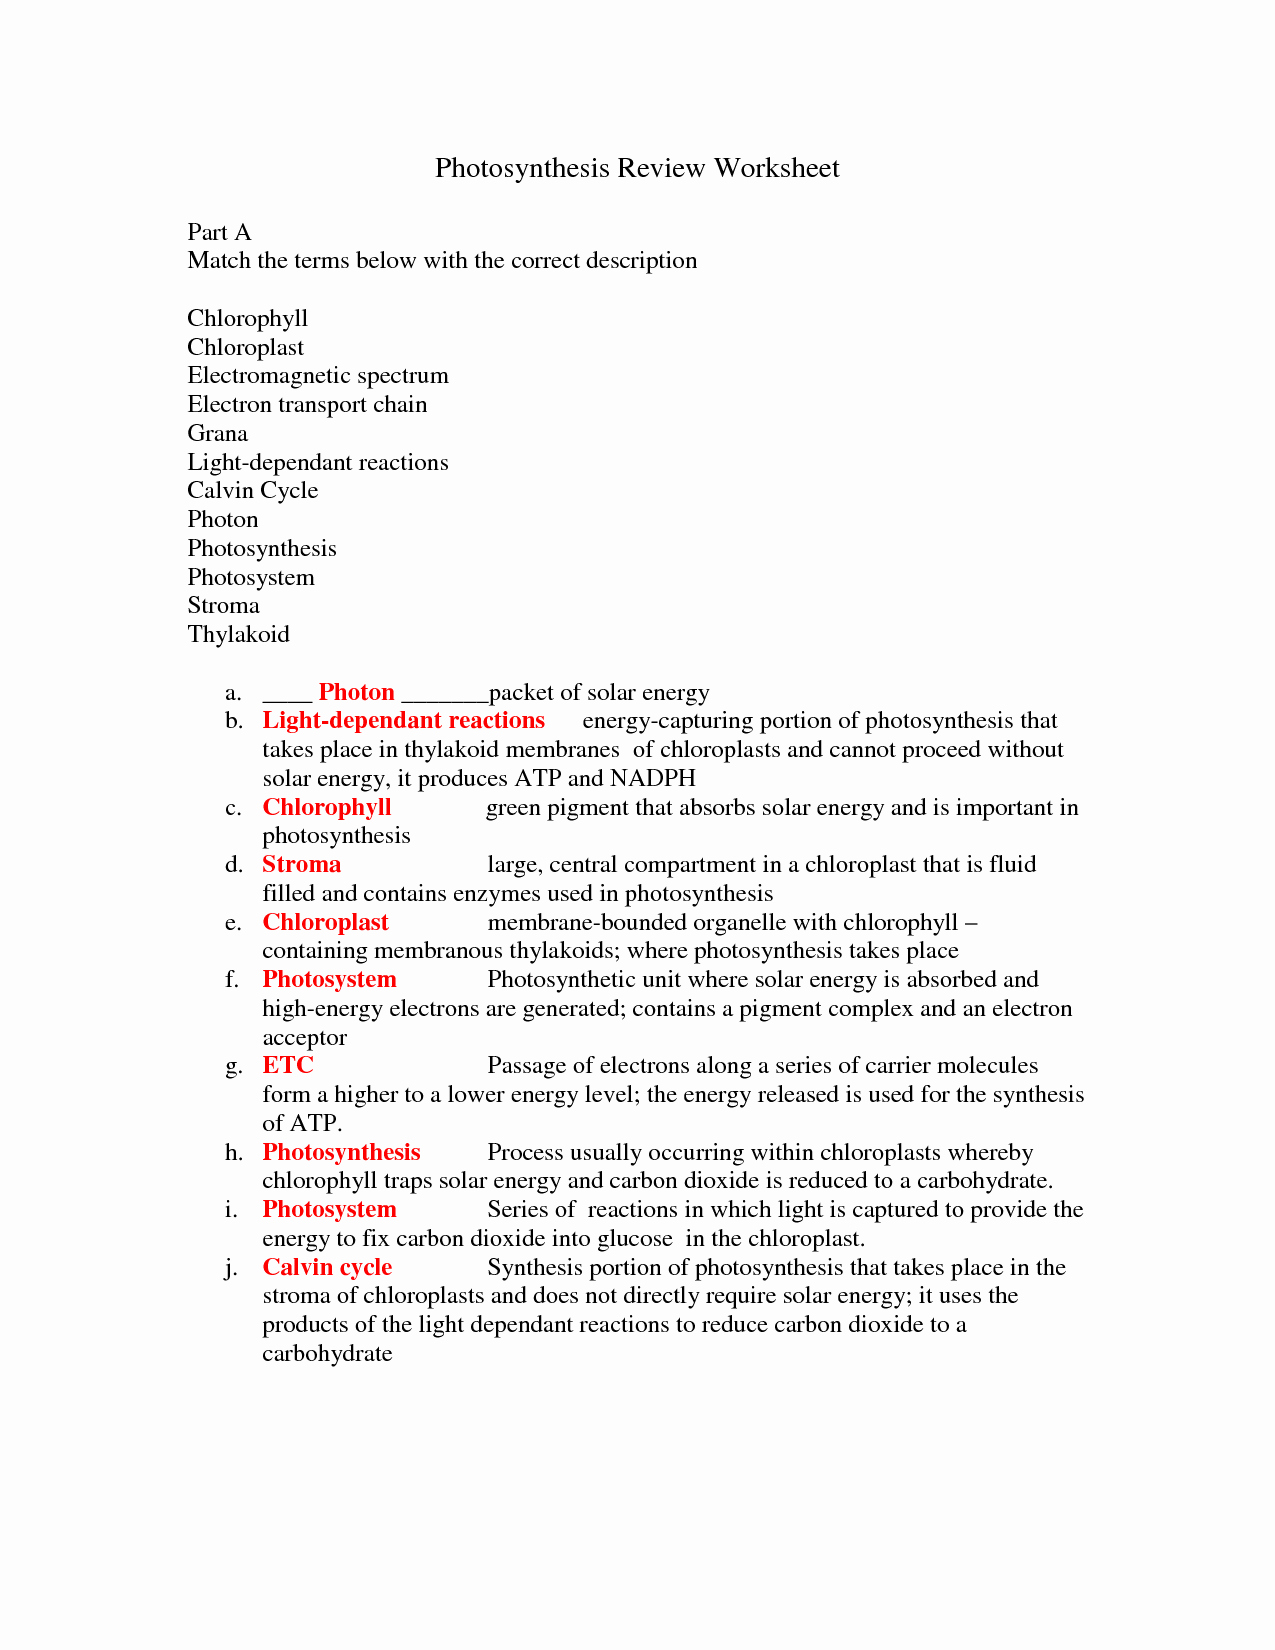 Photosynthesis Worksheet Answer Key Luxury 17 Best Of Synthesis Review Worksheet